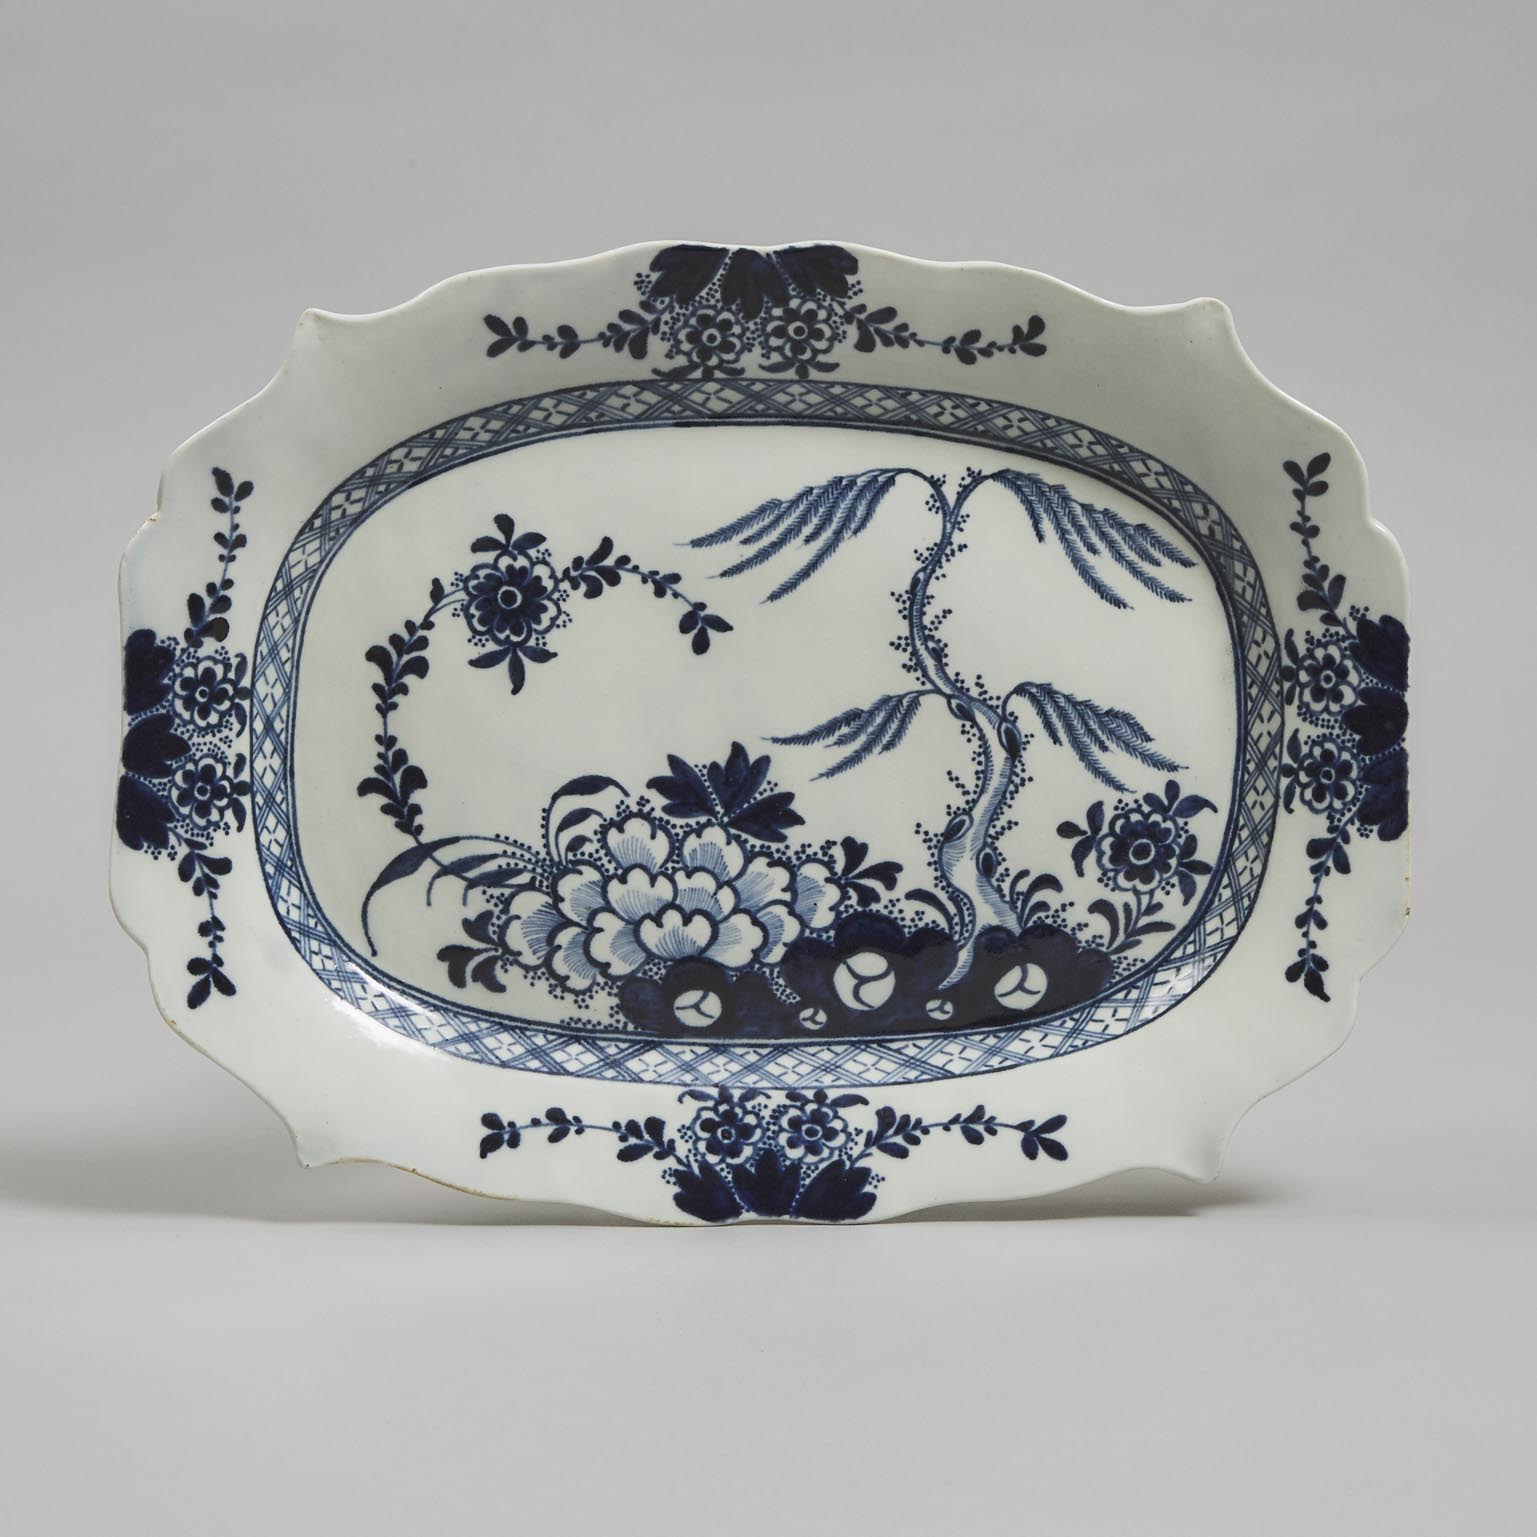 Liverpool Blue and White Shaped Oval Platter, c.1765